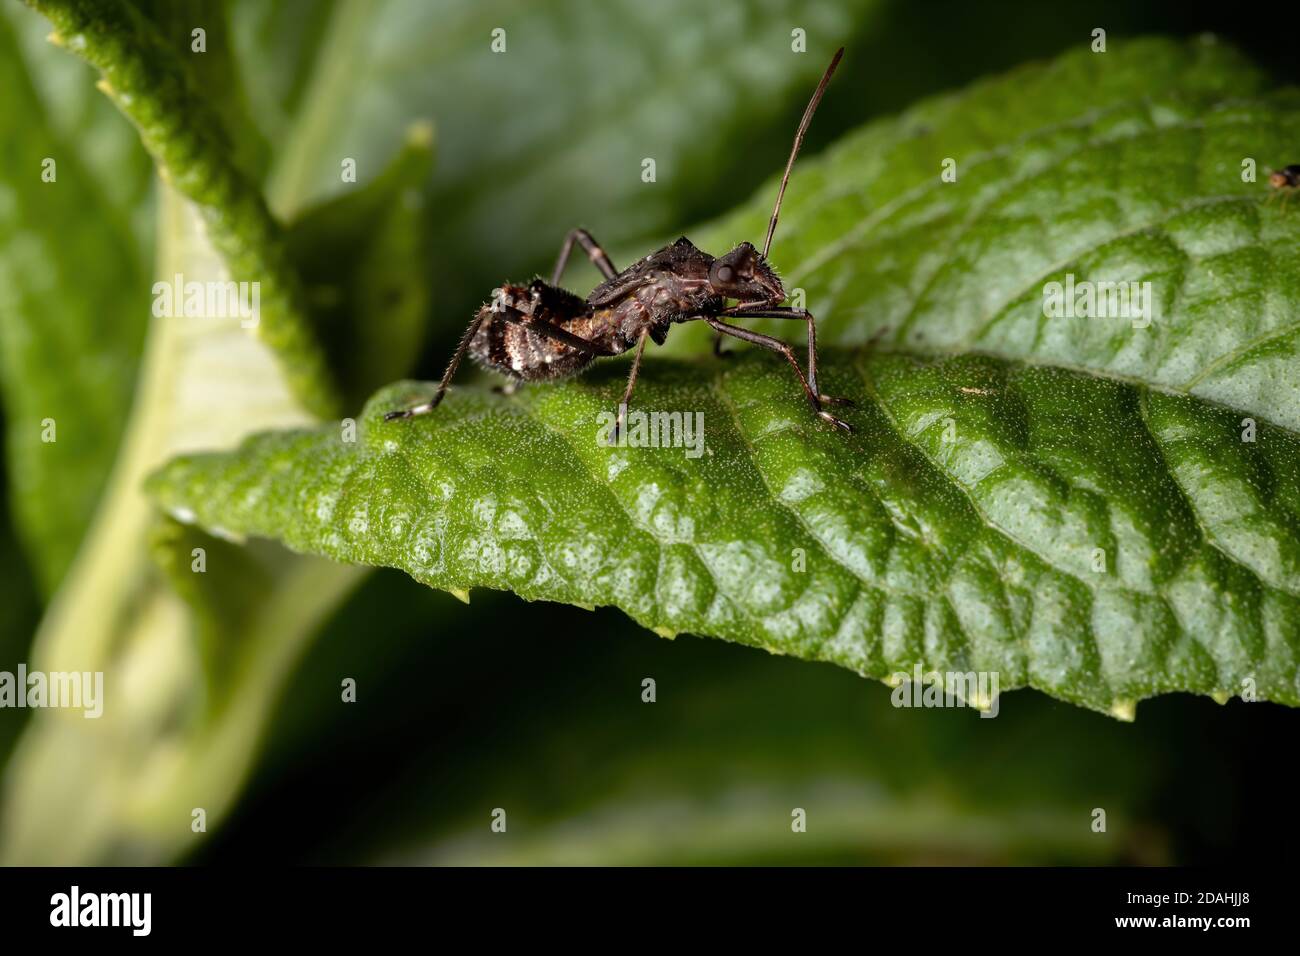 Broad-headed Bug Nymph of the Family Alydidae Stock Photo